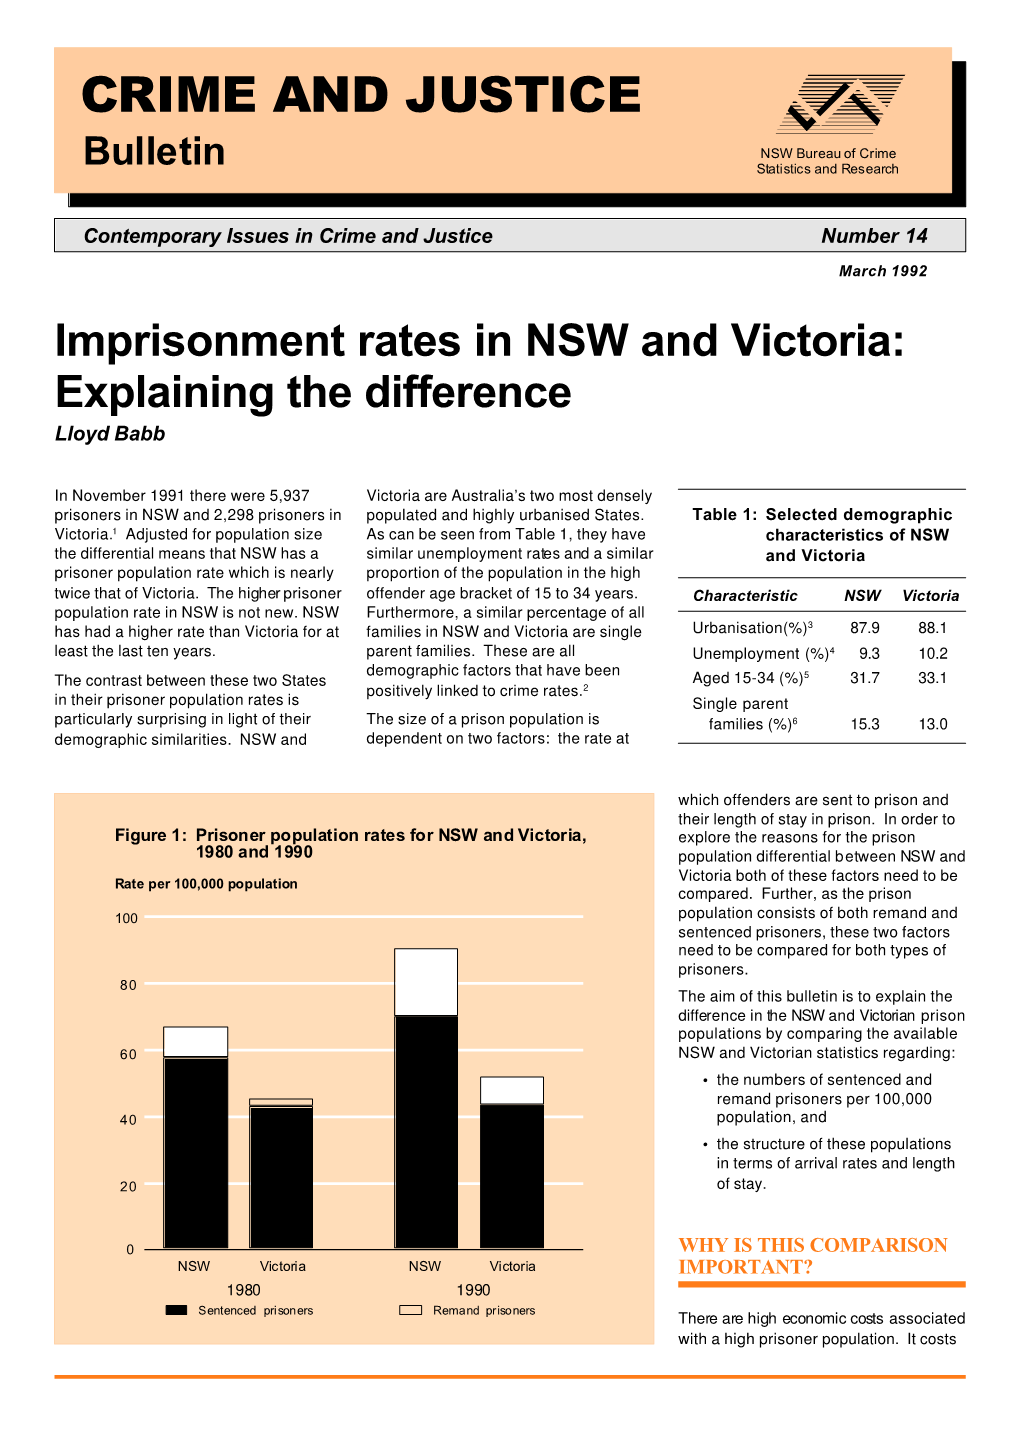 Imprisonment Rates in NSW and Victoria: Explaining the Difference Lloyd Babb